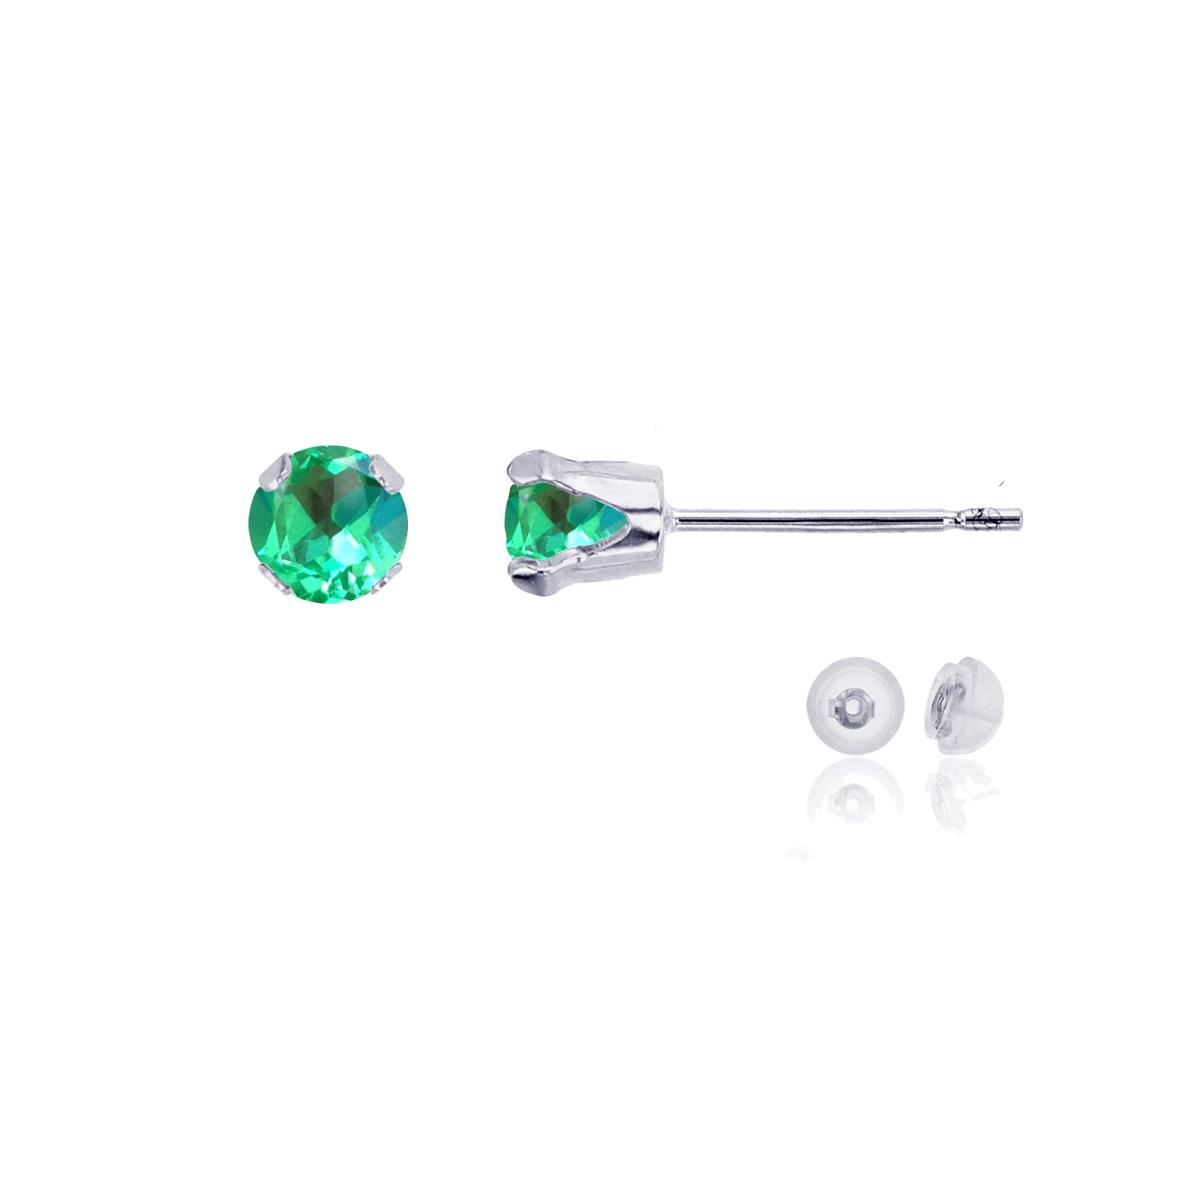 10K White Gold 4mm Round Cr Green Sapphire Stud Earring with Silicone Back